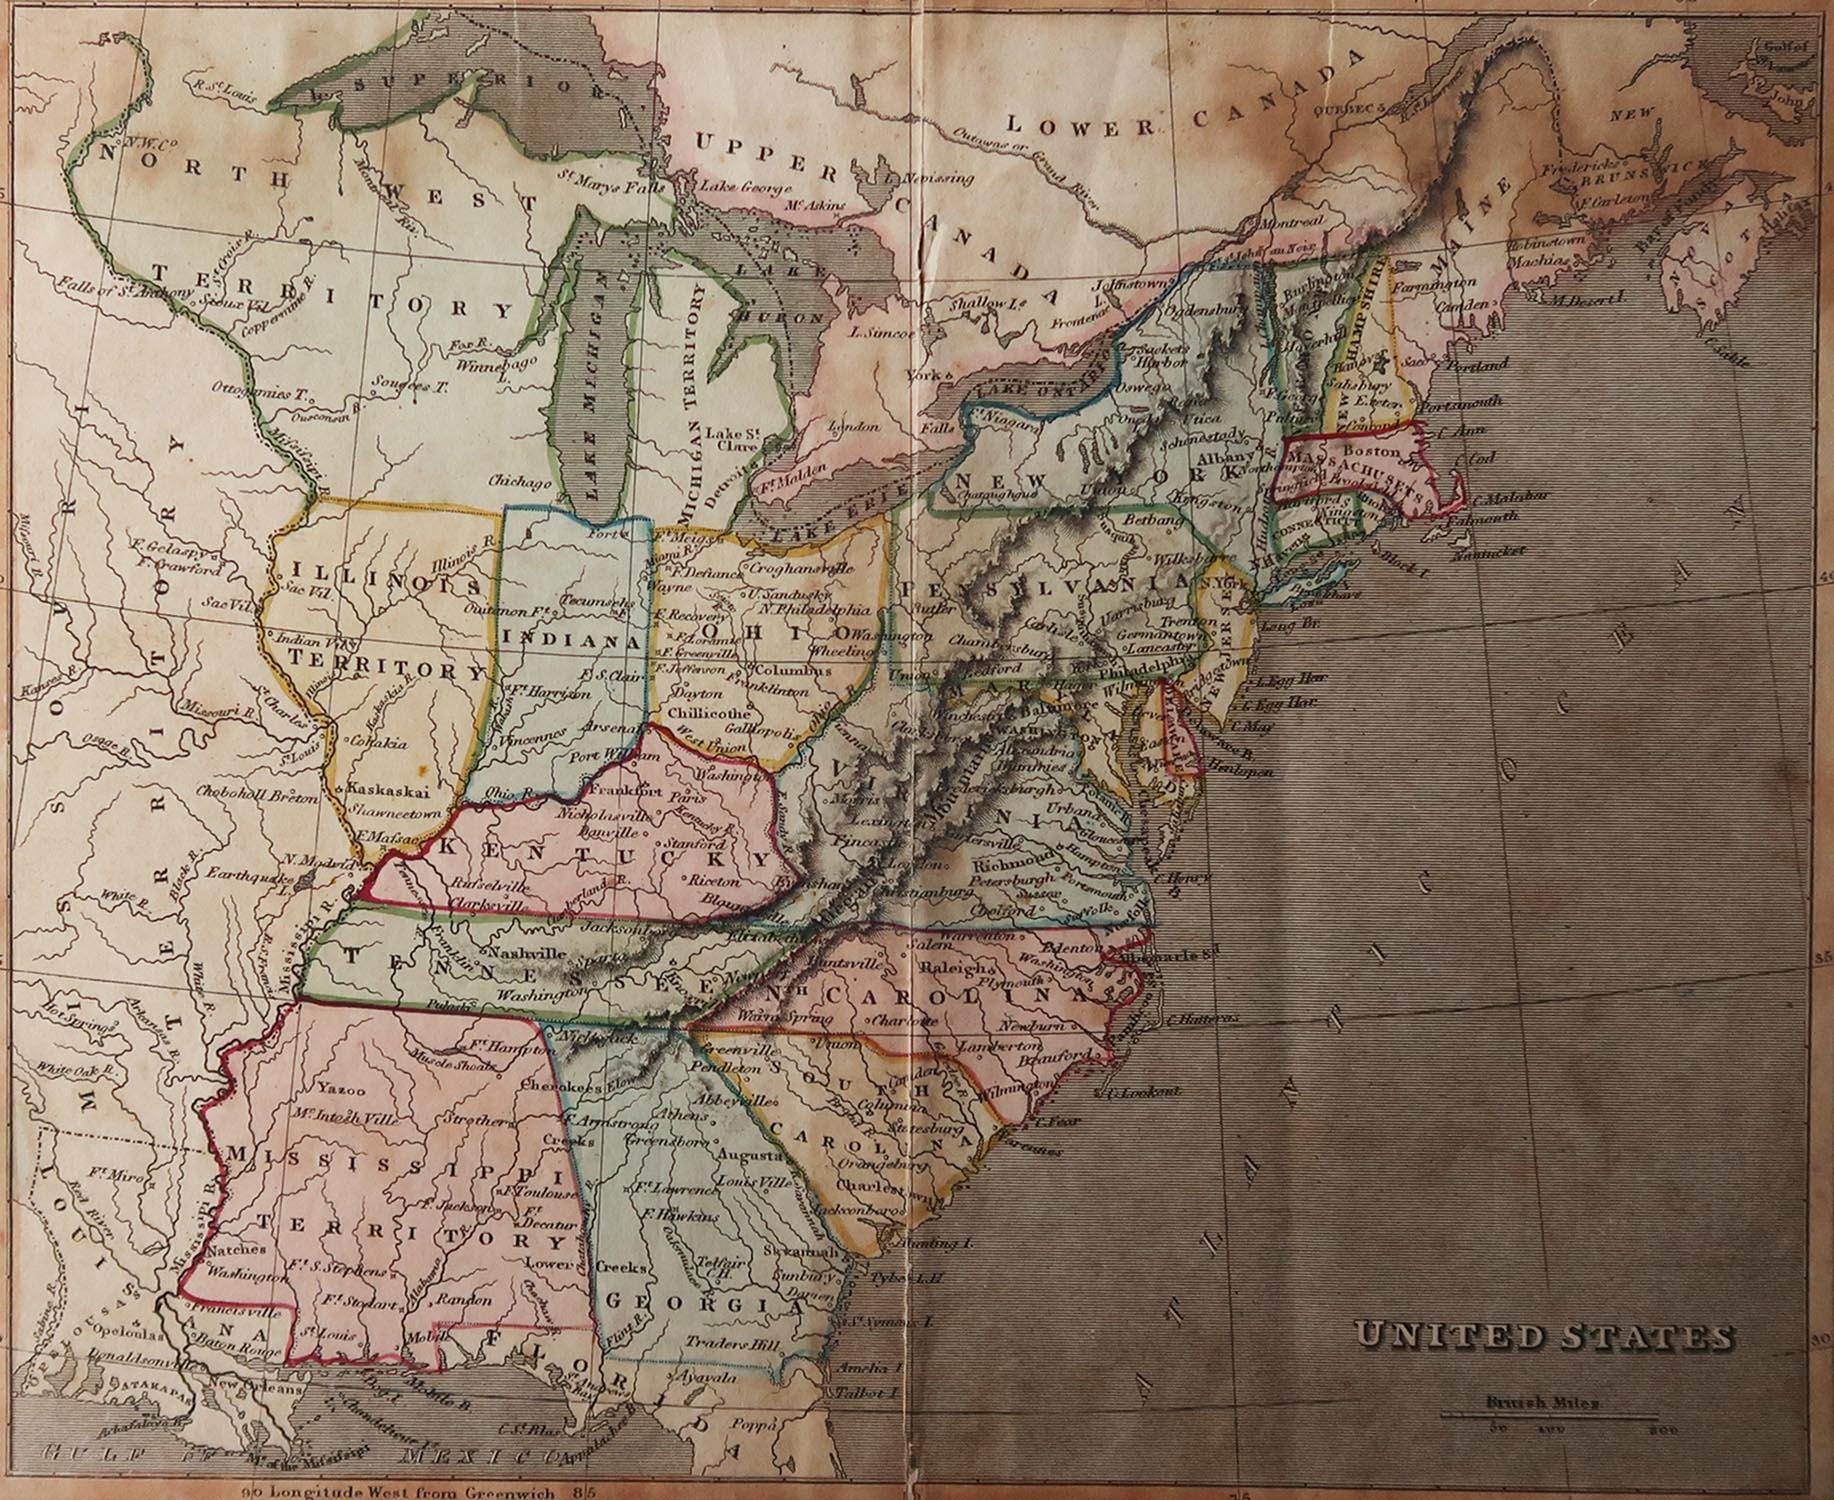 Great map of United States

Published by Sherwood, Neely & Jones. Dated 1820

Original colour 

Unframed.

Condition issues- some foxing, corner losses and slight paper loss to the bottom of the central fold and top edge


